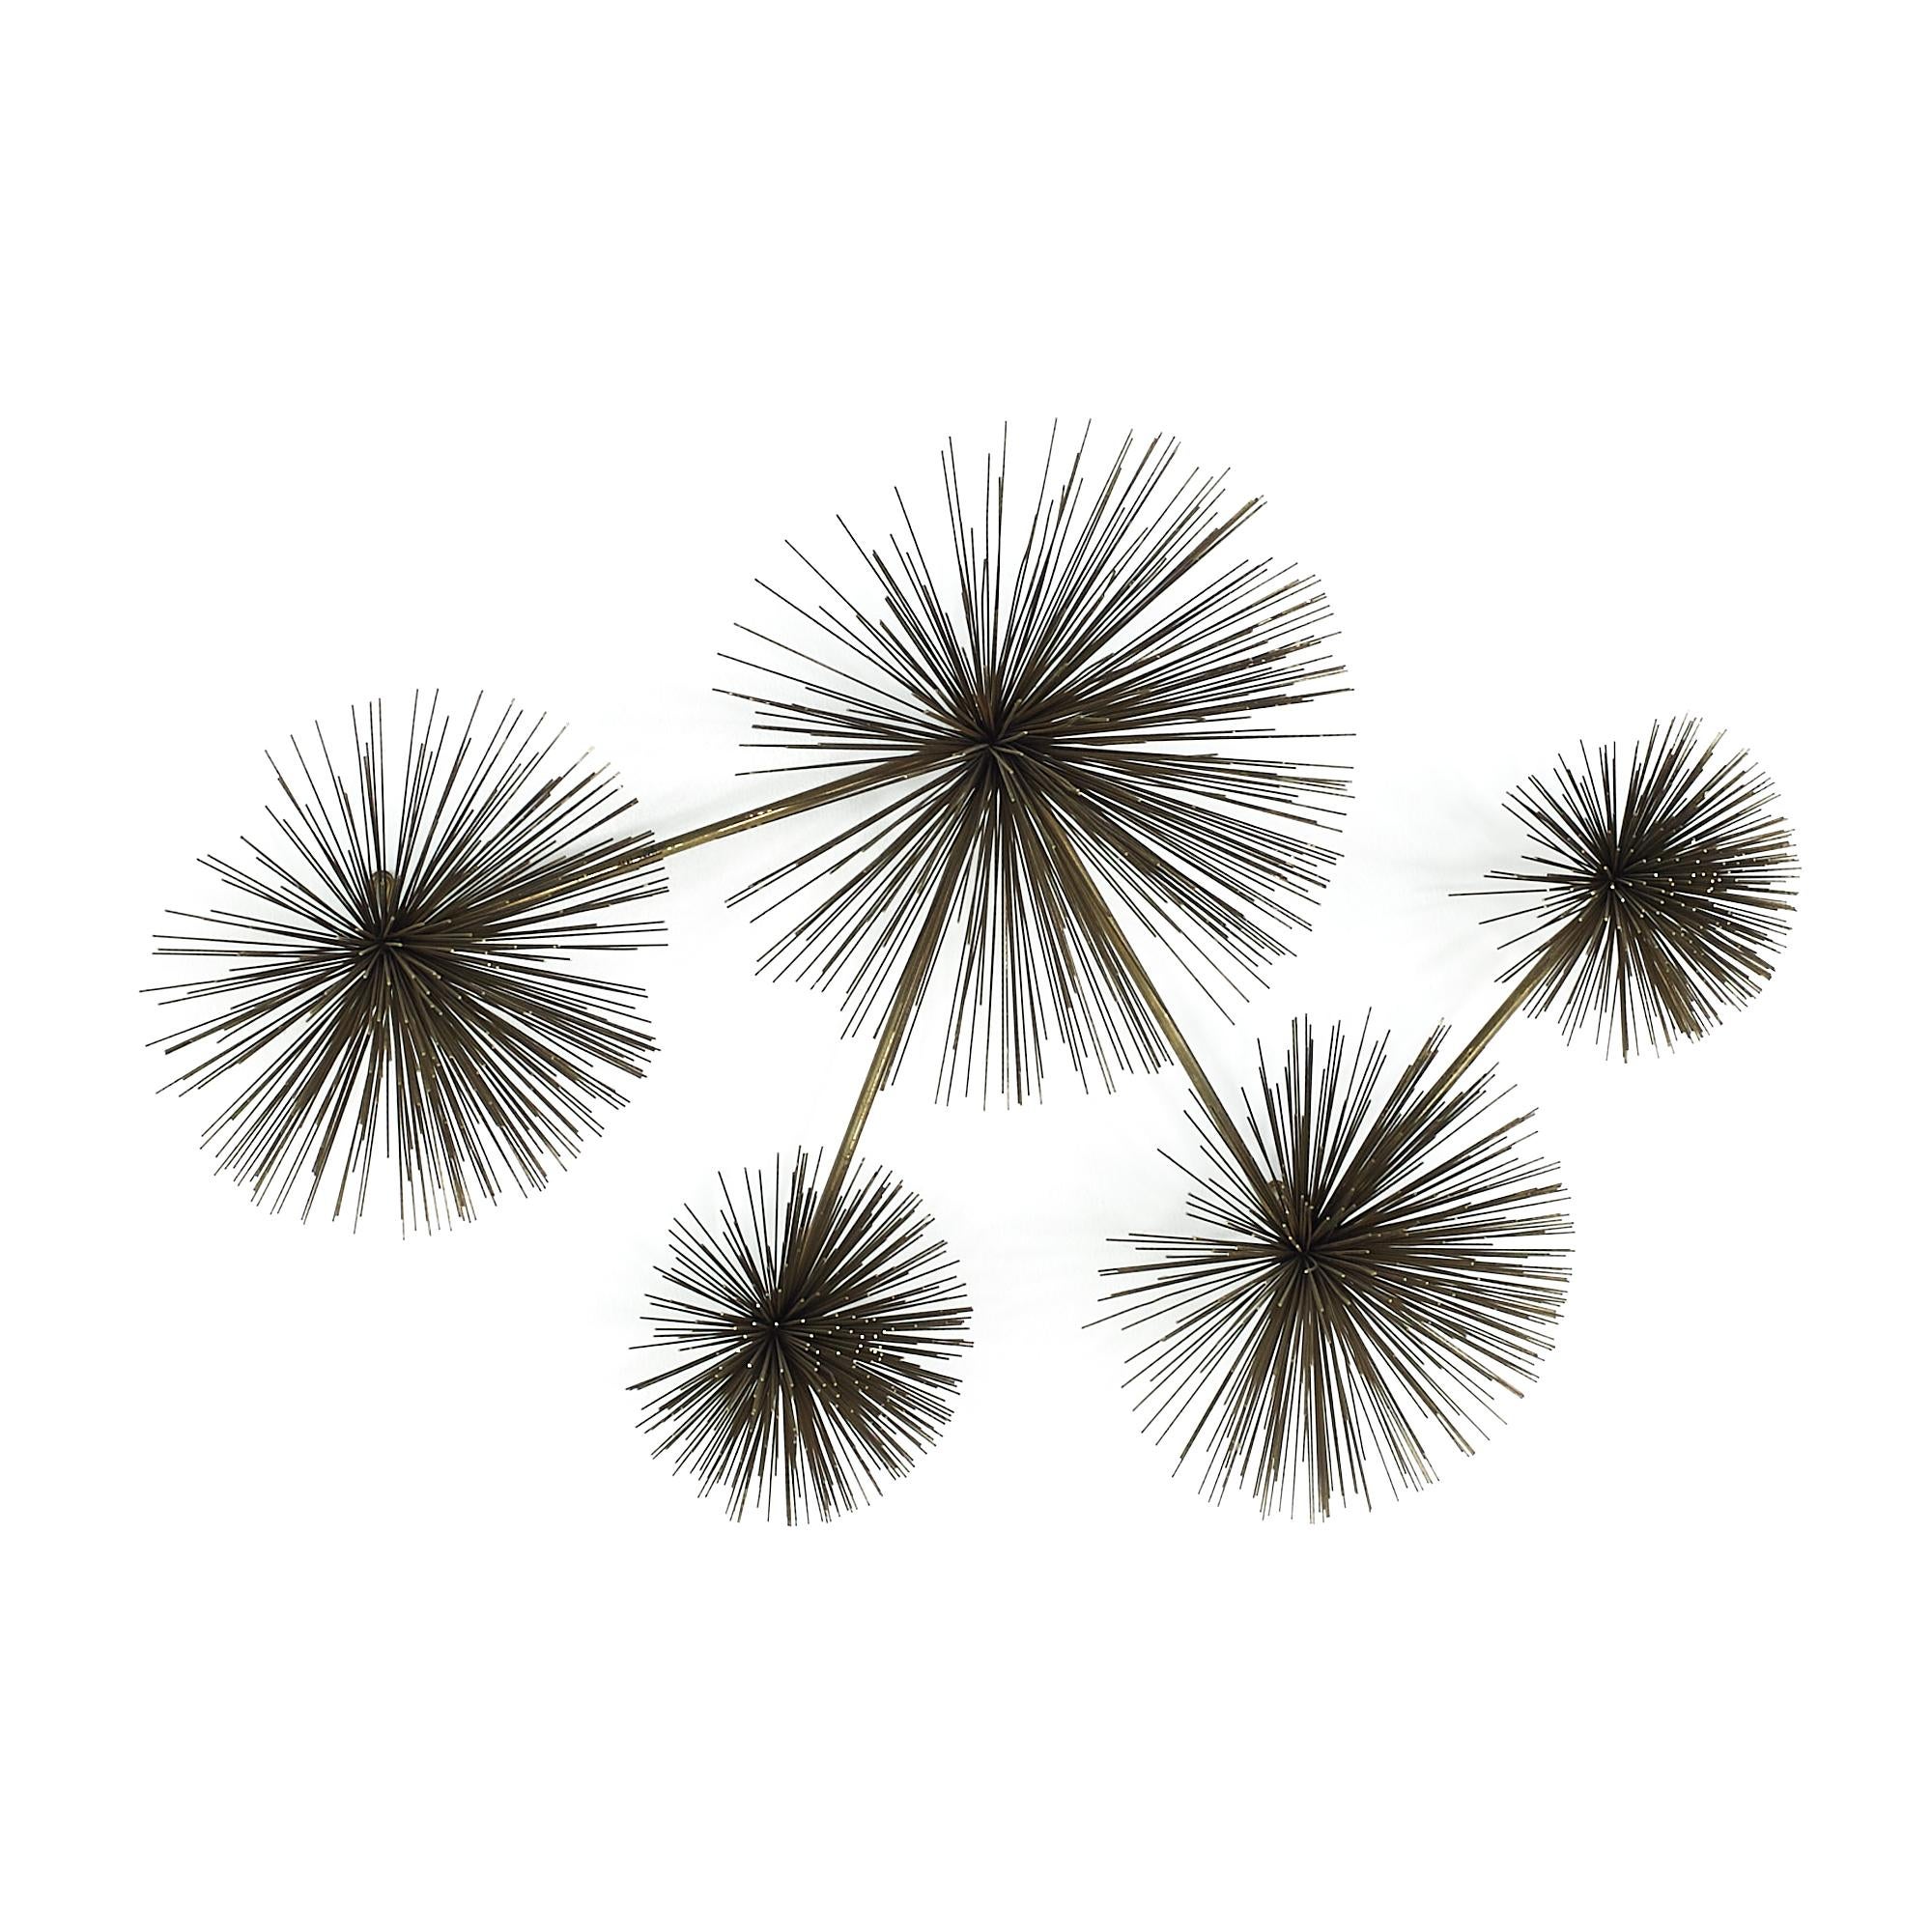 Curtis Jere midcentury Urchin Brass Wall Sculpture

This wall sculpture measures: 40 wide x 25 deep x 10 inches high

We take our photos in a controlled lighting studio to show as much detail as possible. We do not photoshop out blemishes.